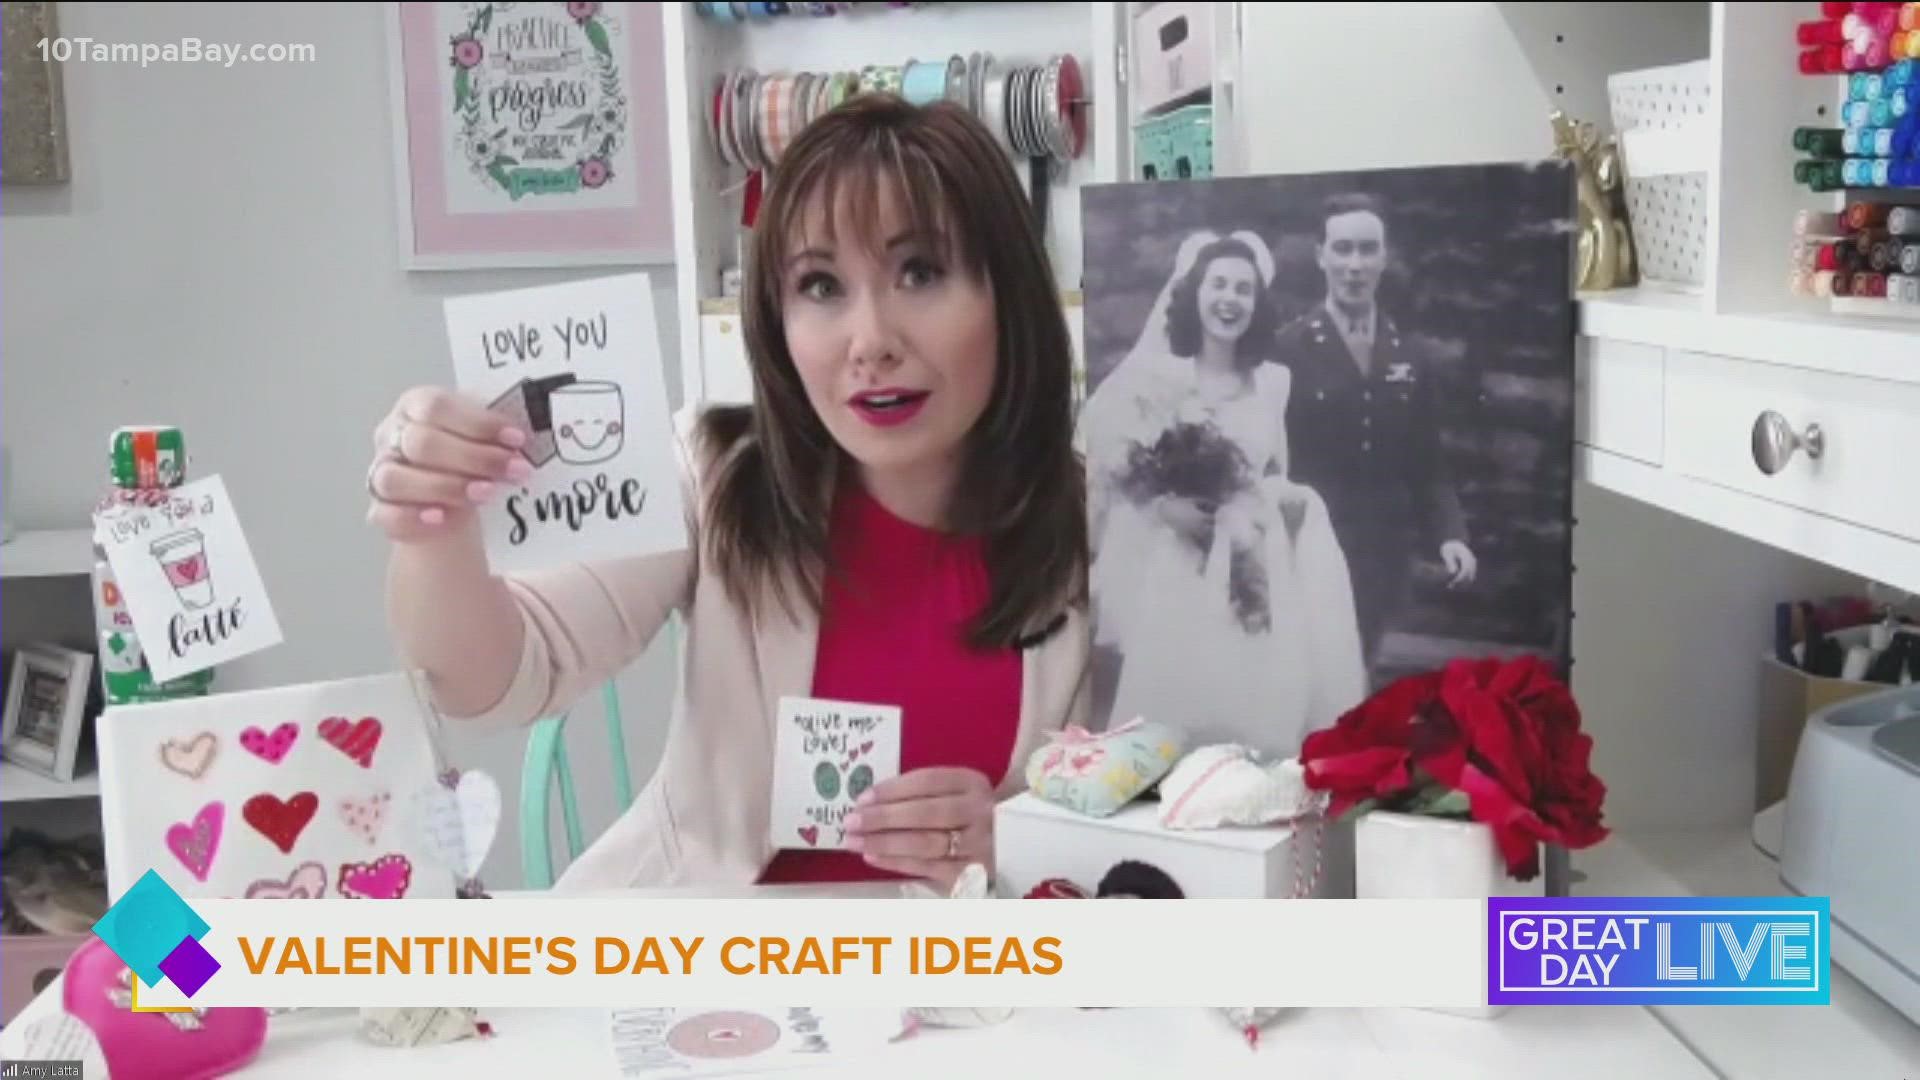 From home decor to fun-loving crafts for the kids, Amy Latta has your crafts covered.